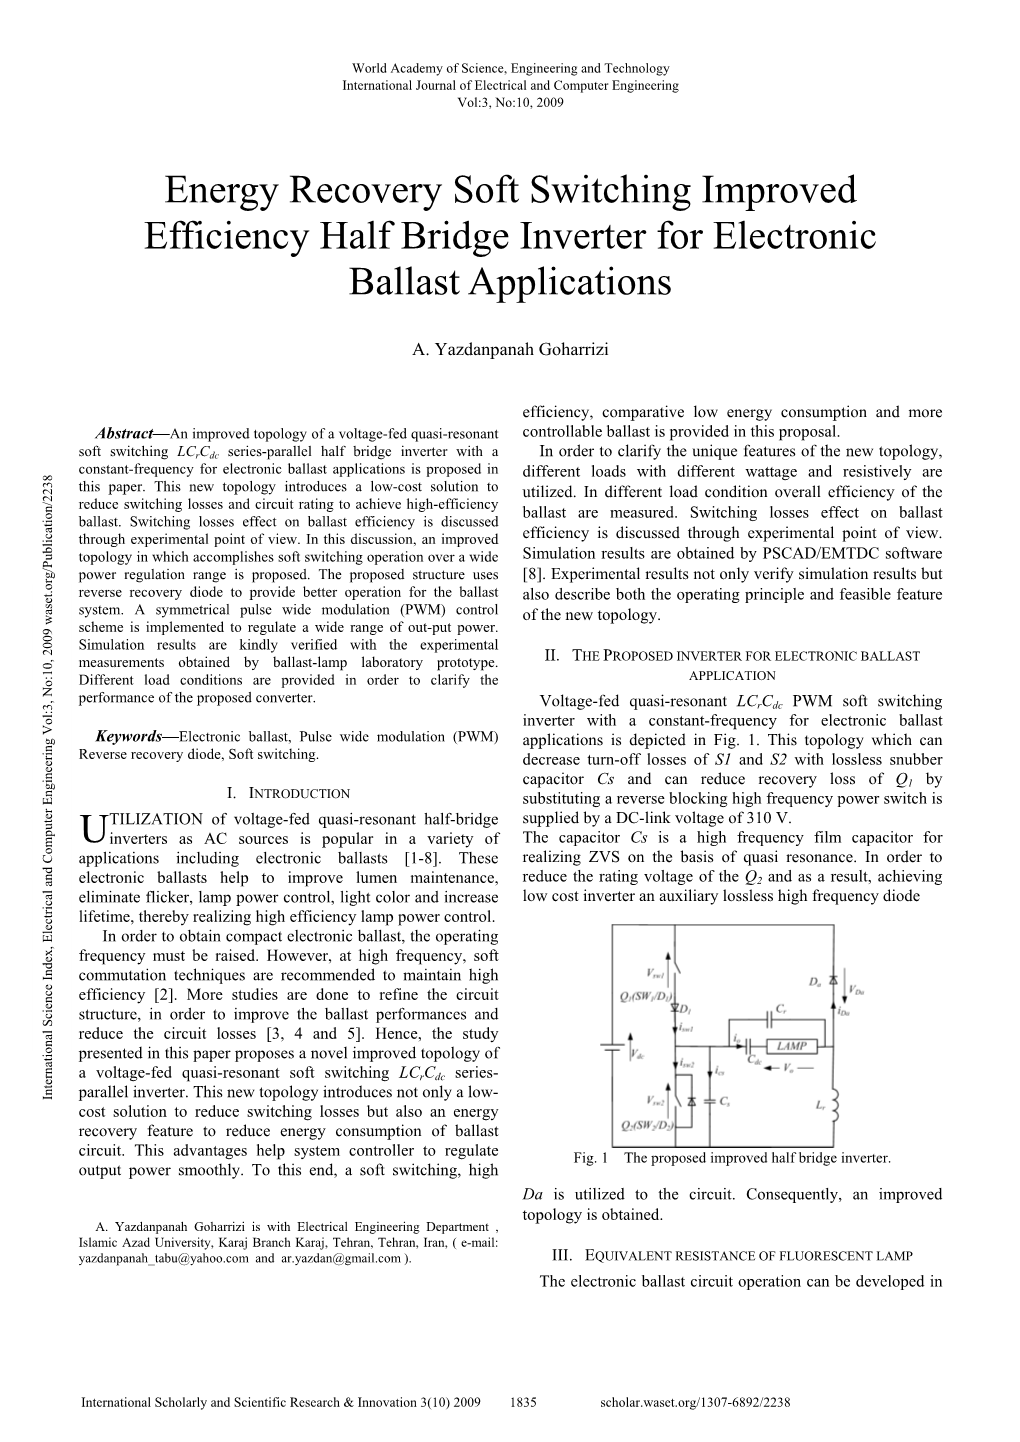 Energy Recovery Soft Switching Improved Efficiency Half Bridge Inverter for Electronic Ballast Applications